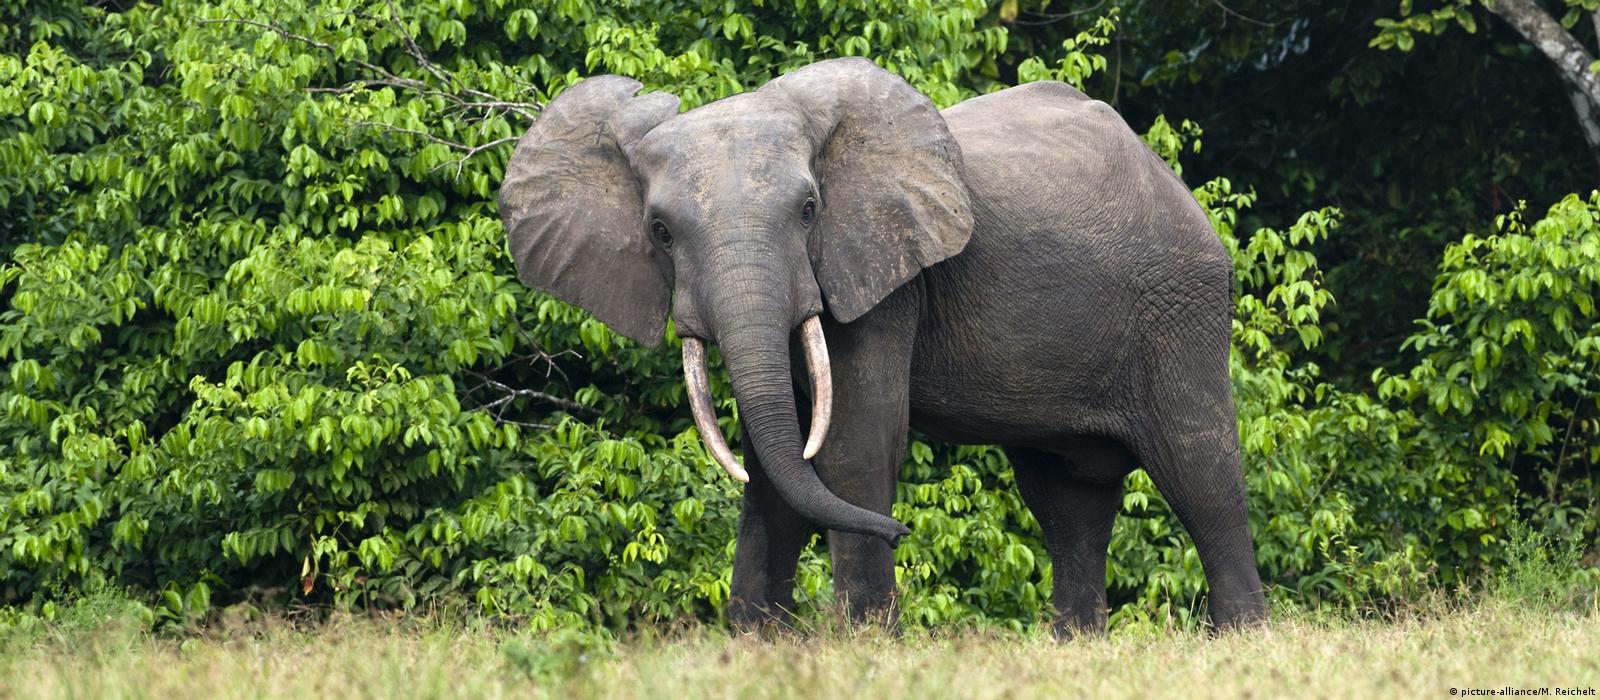 CITES: As elephant numbers fall, ivory dispute rumbles on – DW – 08/23/2019